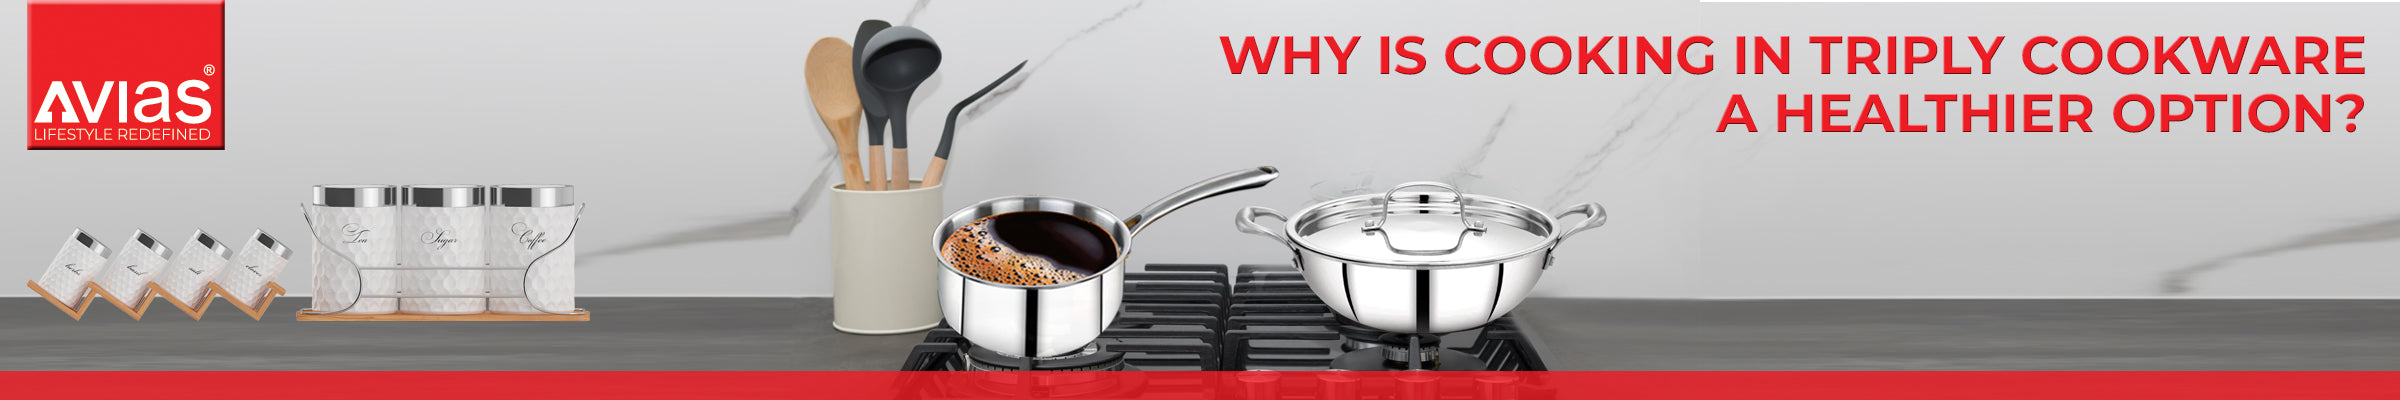 http://cdn.shopify.com/s/files/1/0630/7869/5164/files/Why_is_cooking_in_Triply_cookware_a_healthier_option.jpg?v=1677235504